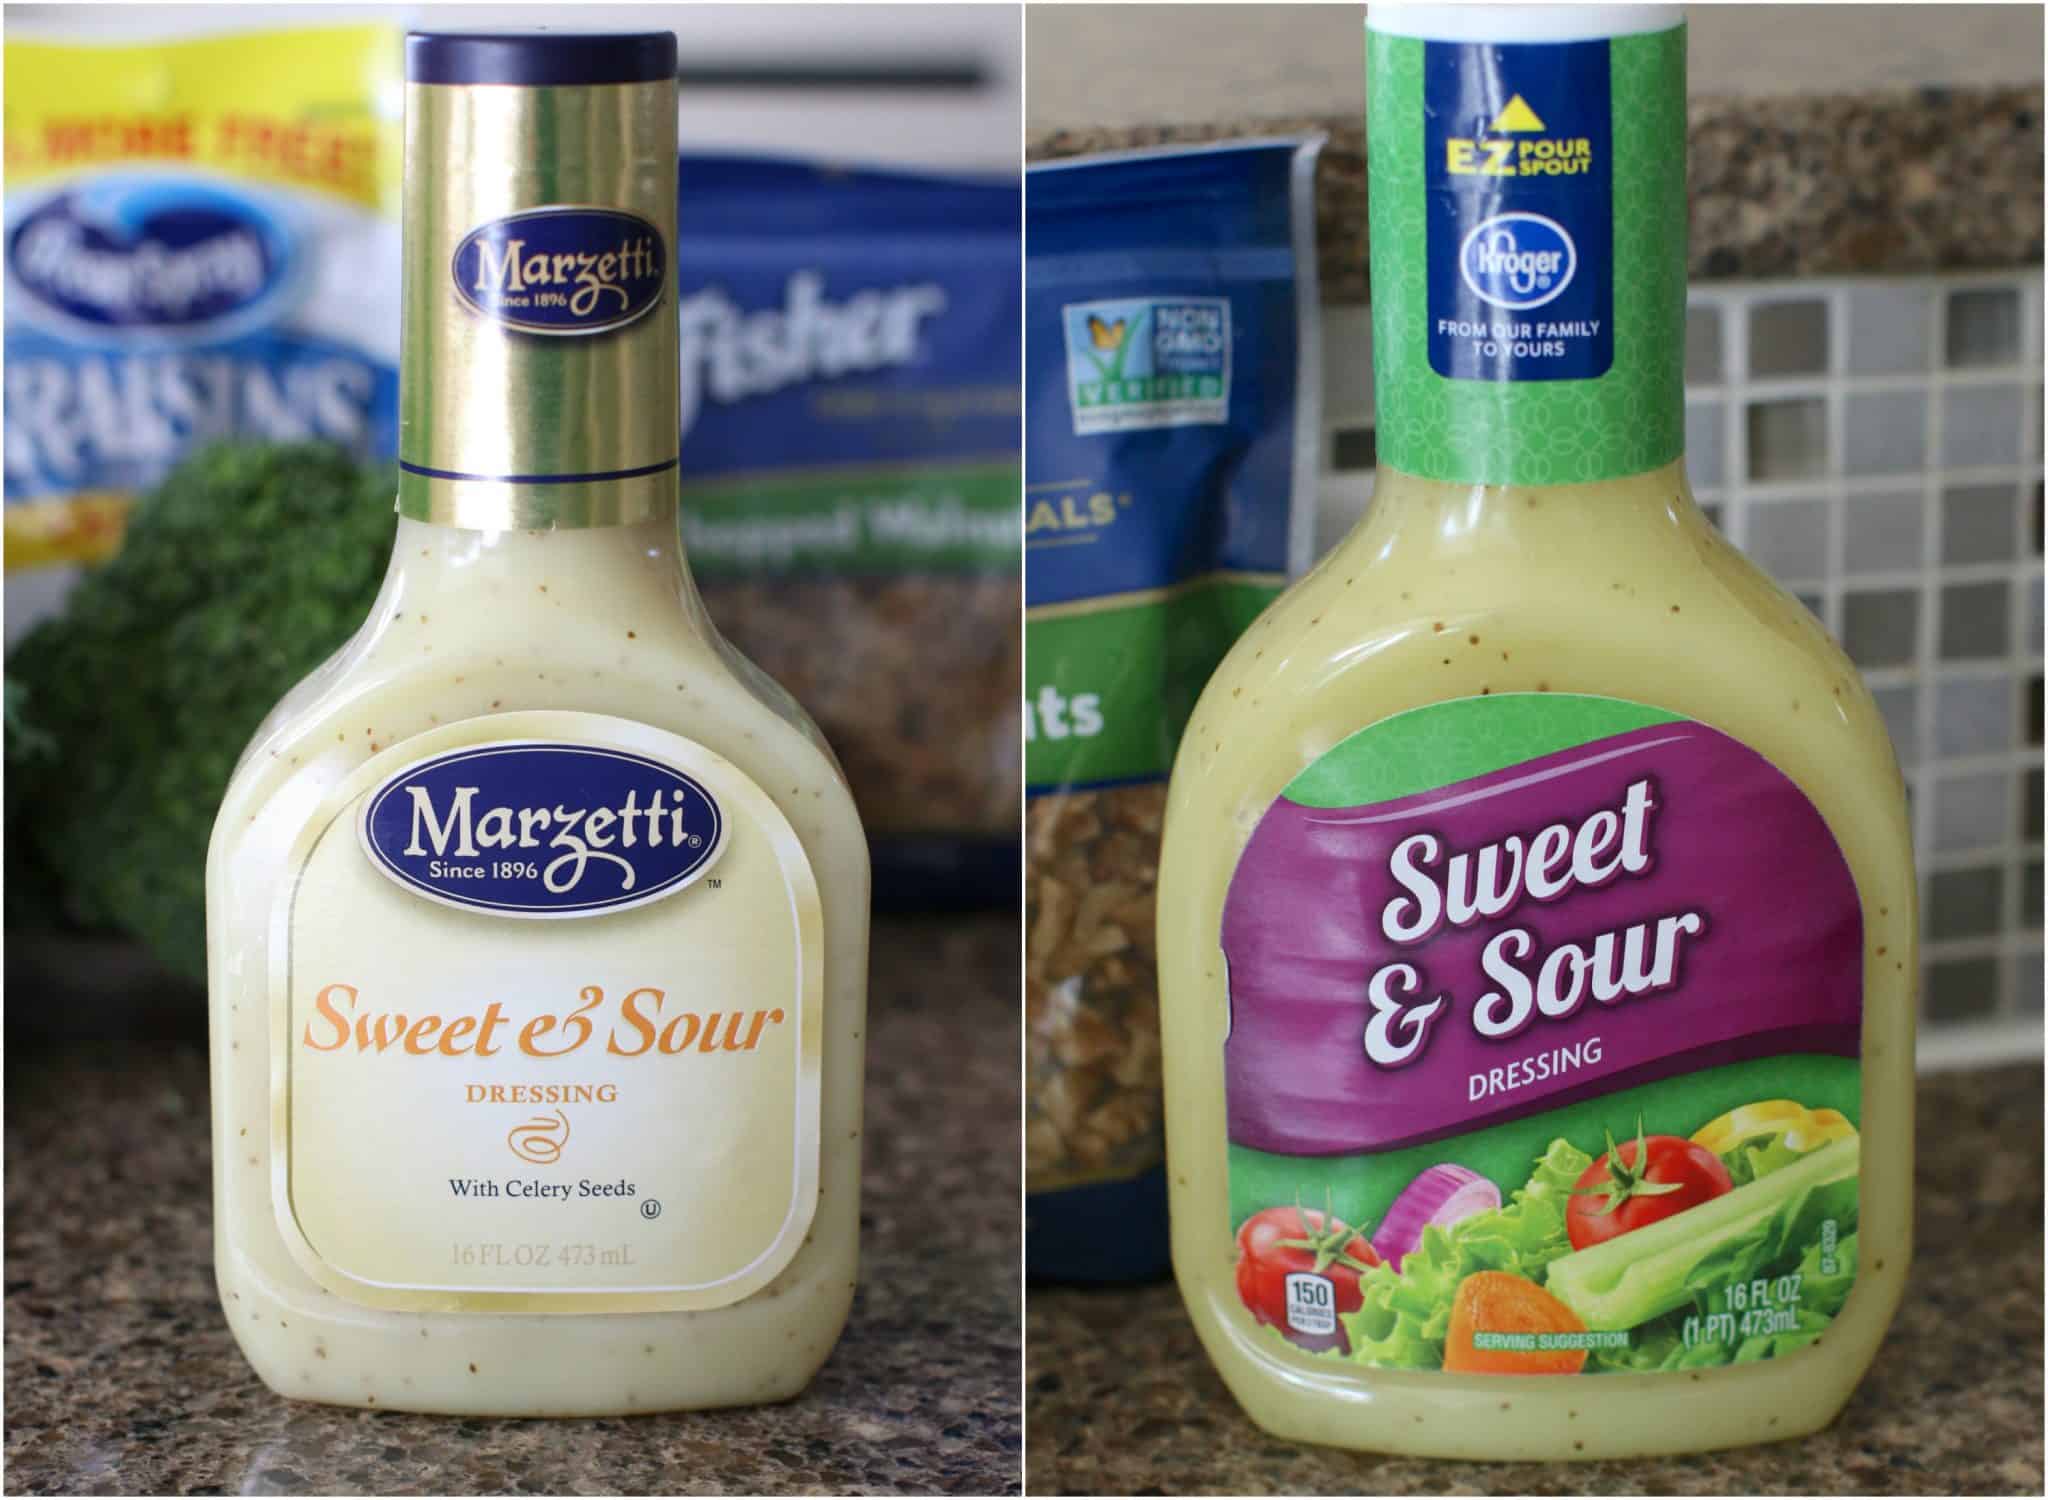 a photo showing two bottles of sweet and sour dressing. Bottle on the left is Marietta Sweet and Sour dressing and bottle on the right is Kroger brand Sweet and Sour dressing.